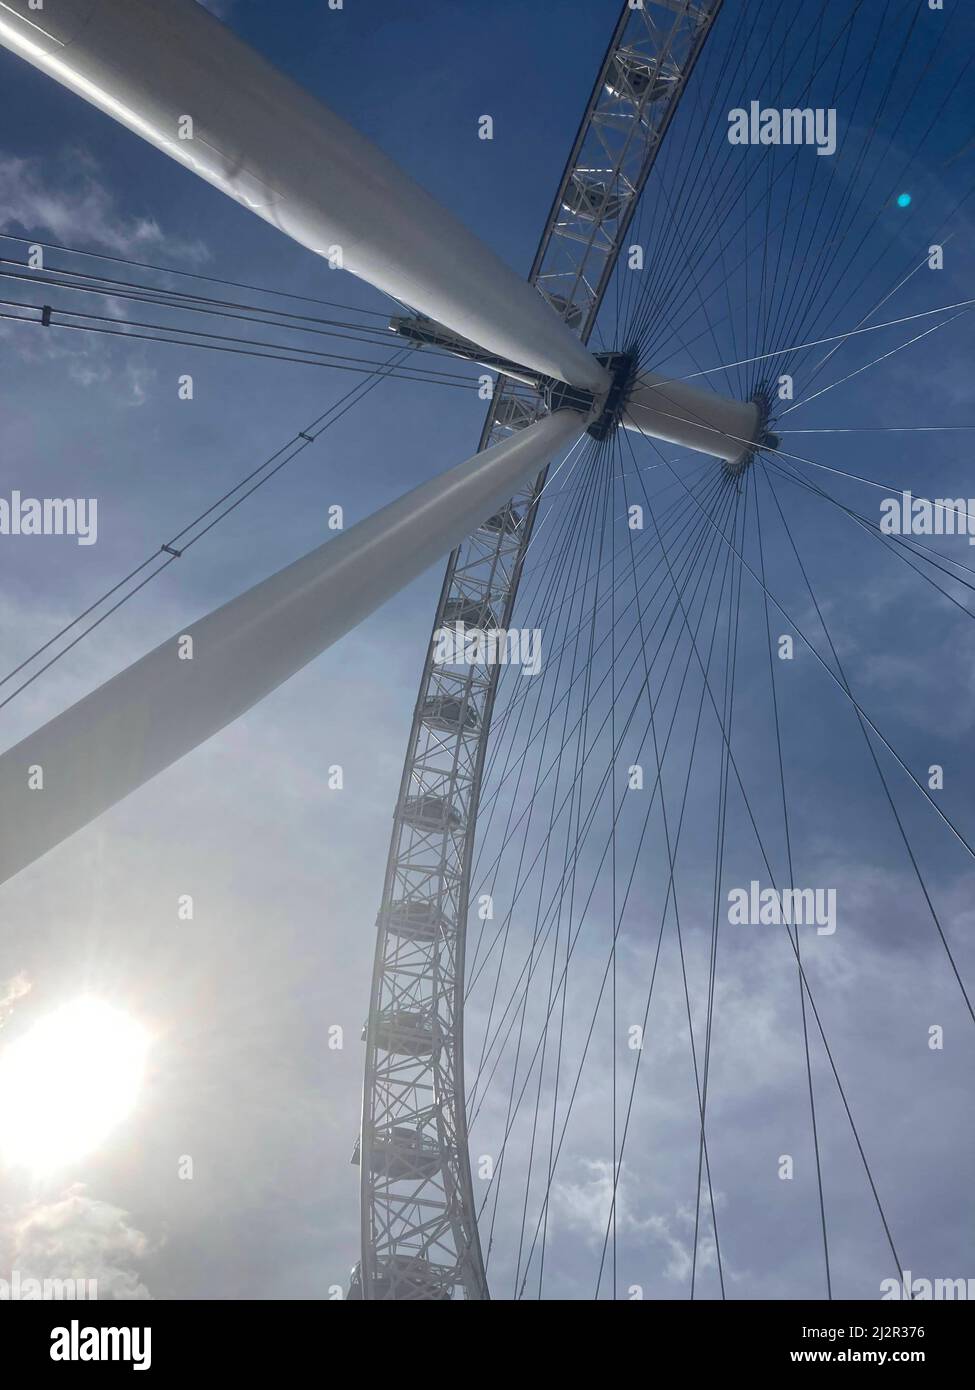 The London Eye, or Millennium Wheel, big wheel attraction on a sunny day in Waterloo, London Stock Photo